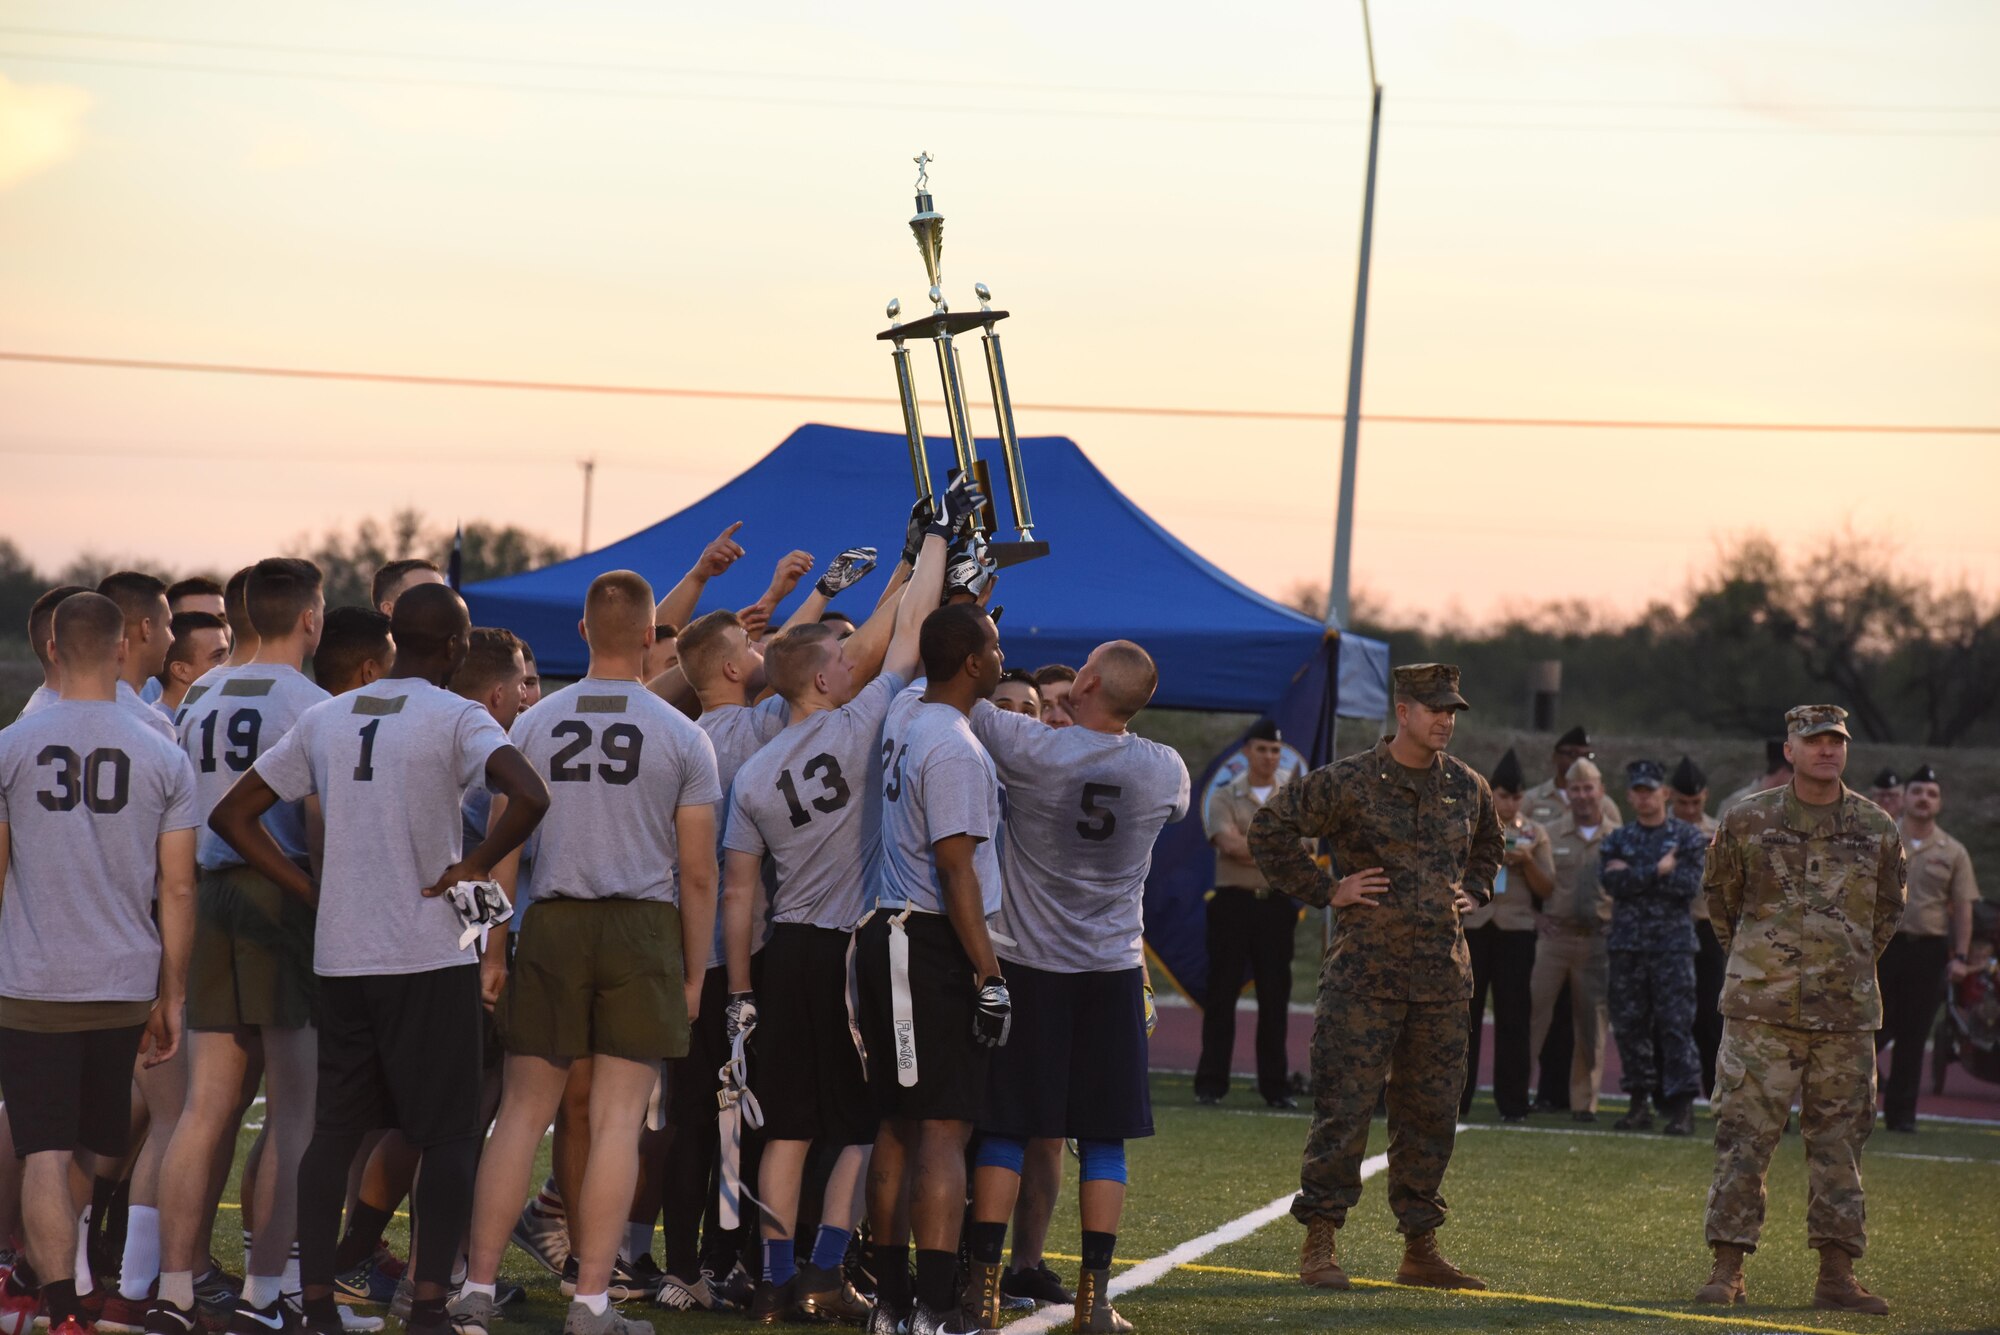 U.S Navy and Marines join around the trophy after winning the Army-Navy game at the Mathis Fitness Center field Dec. 1. This is the Navy’s second win in 14 years. (U.S. Air Force photo by Airman 1st Class Zachary Chapman/Released)